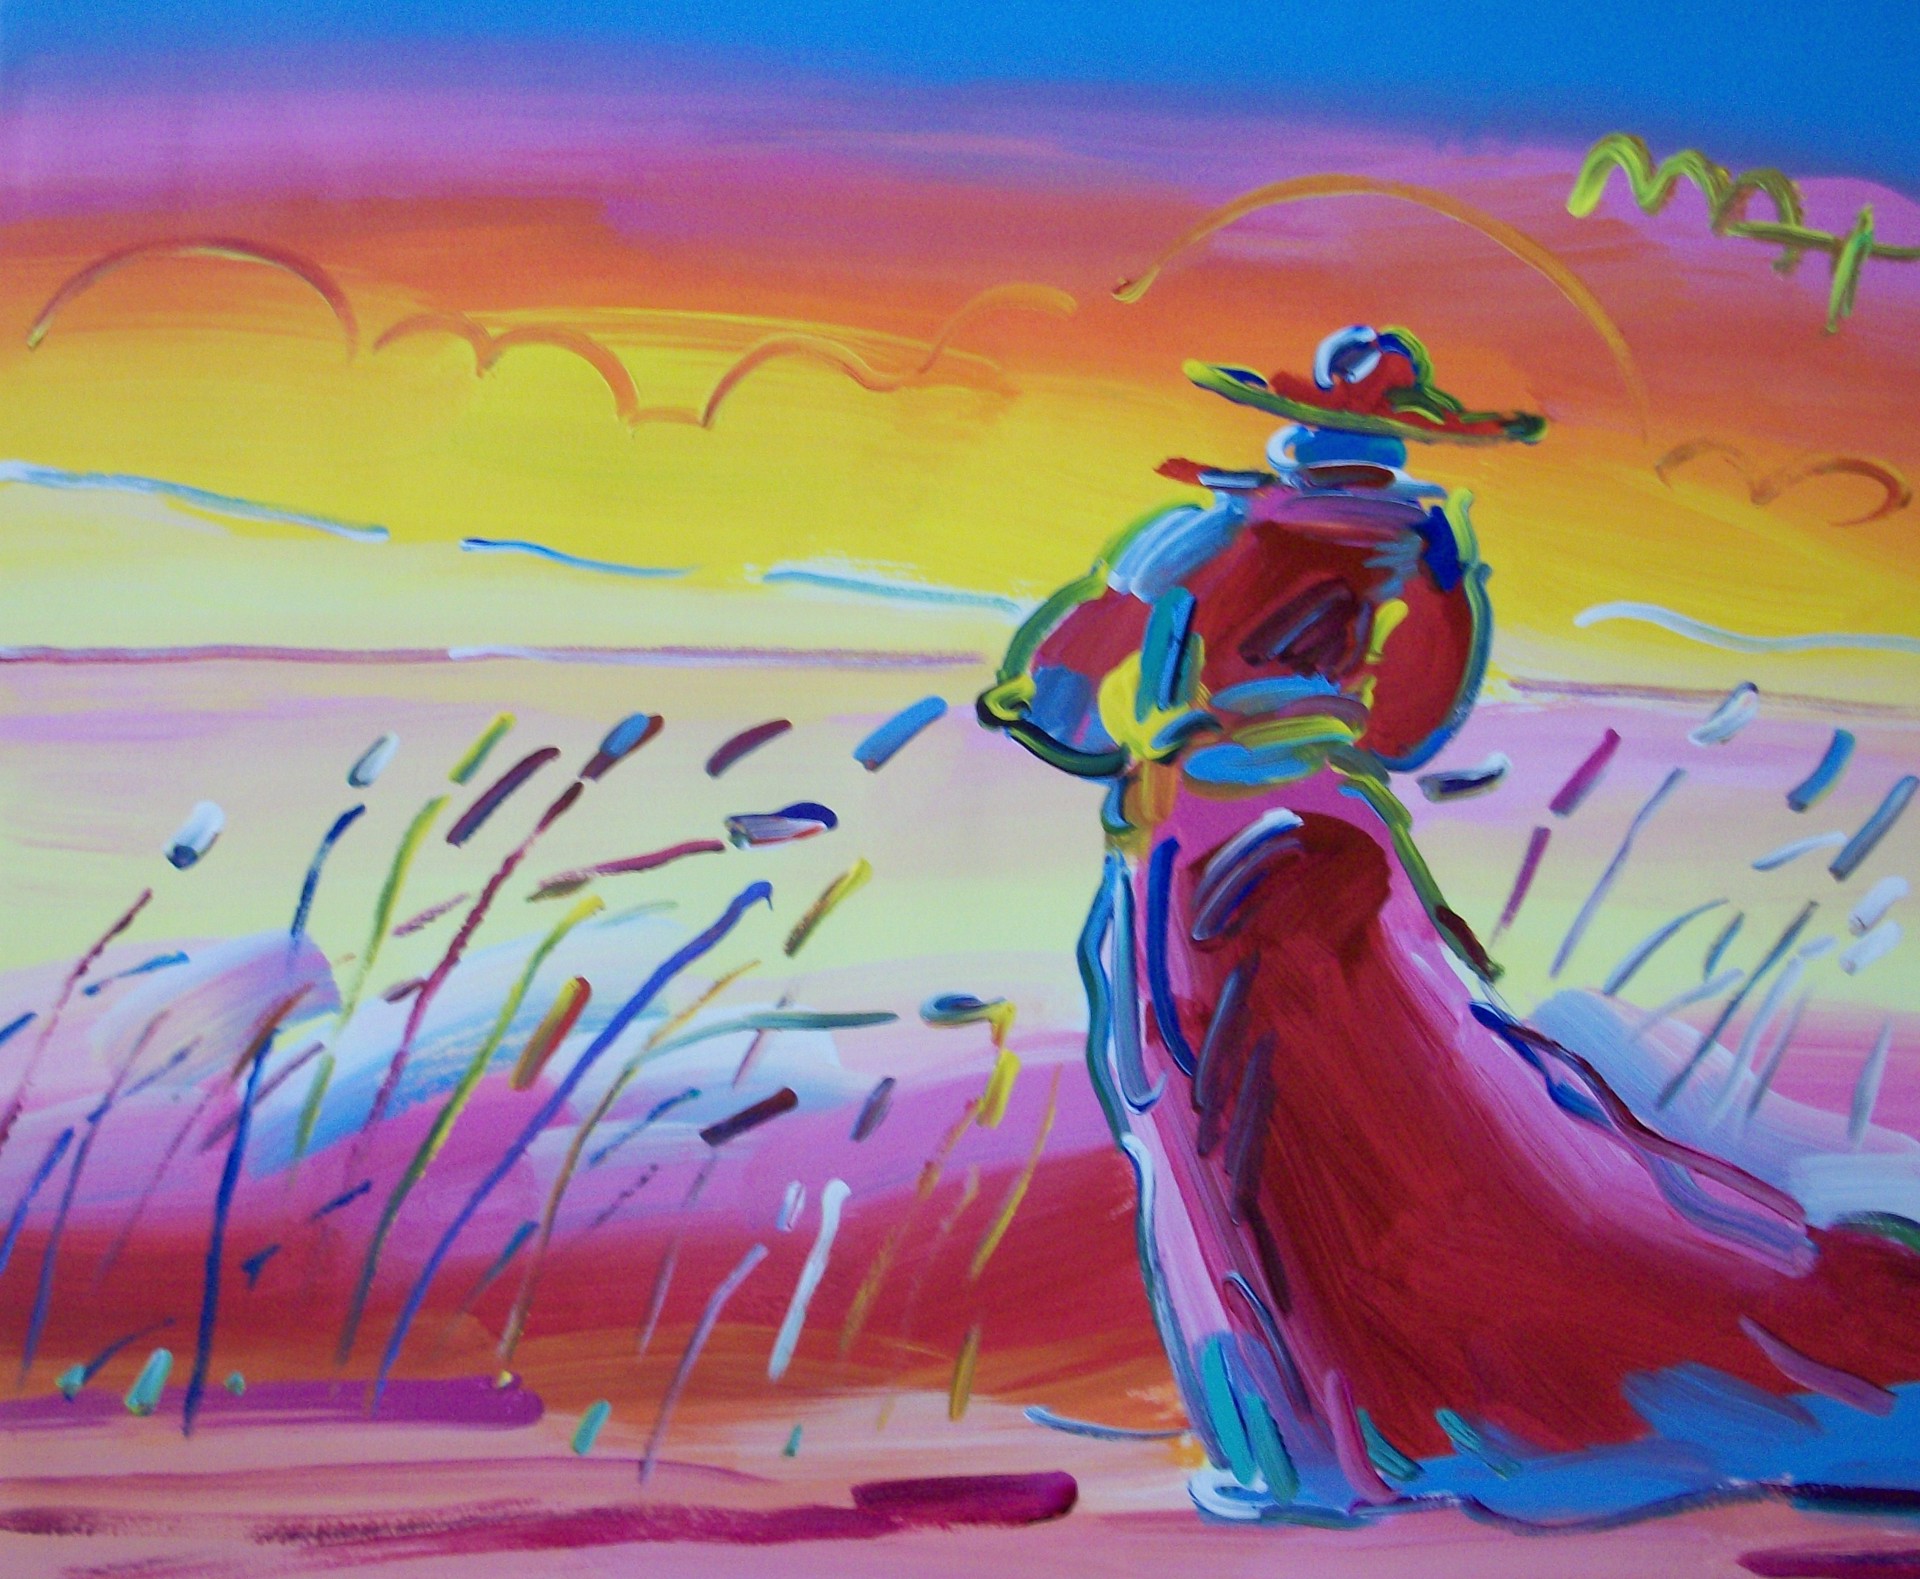 Walking in Reeds by Peter Max